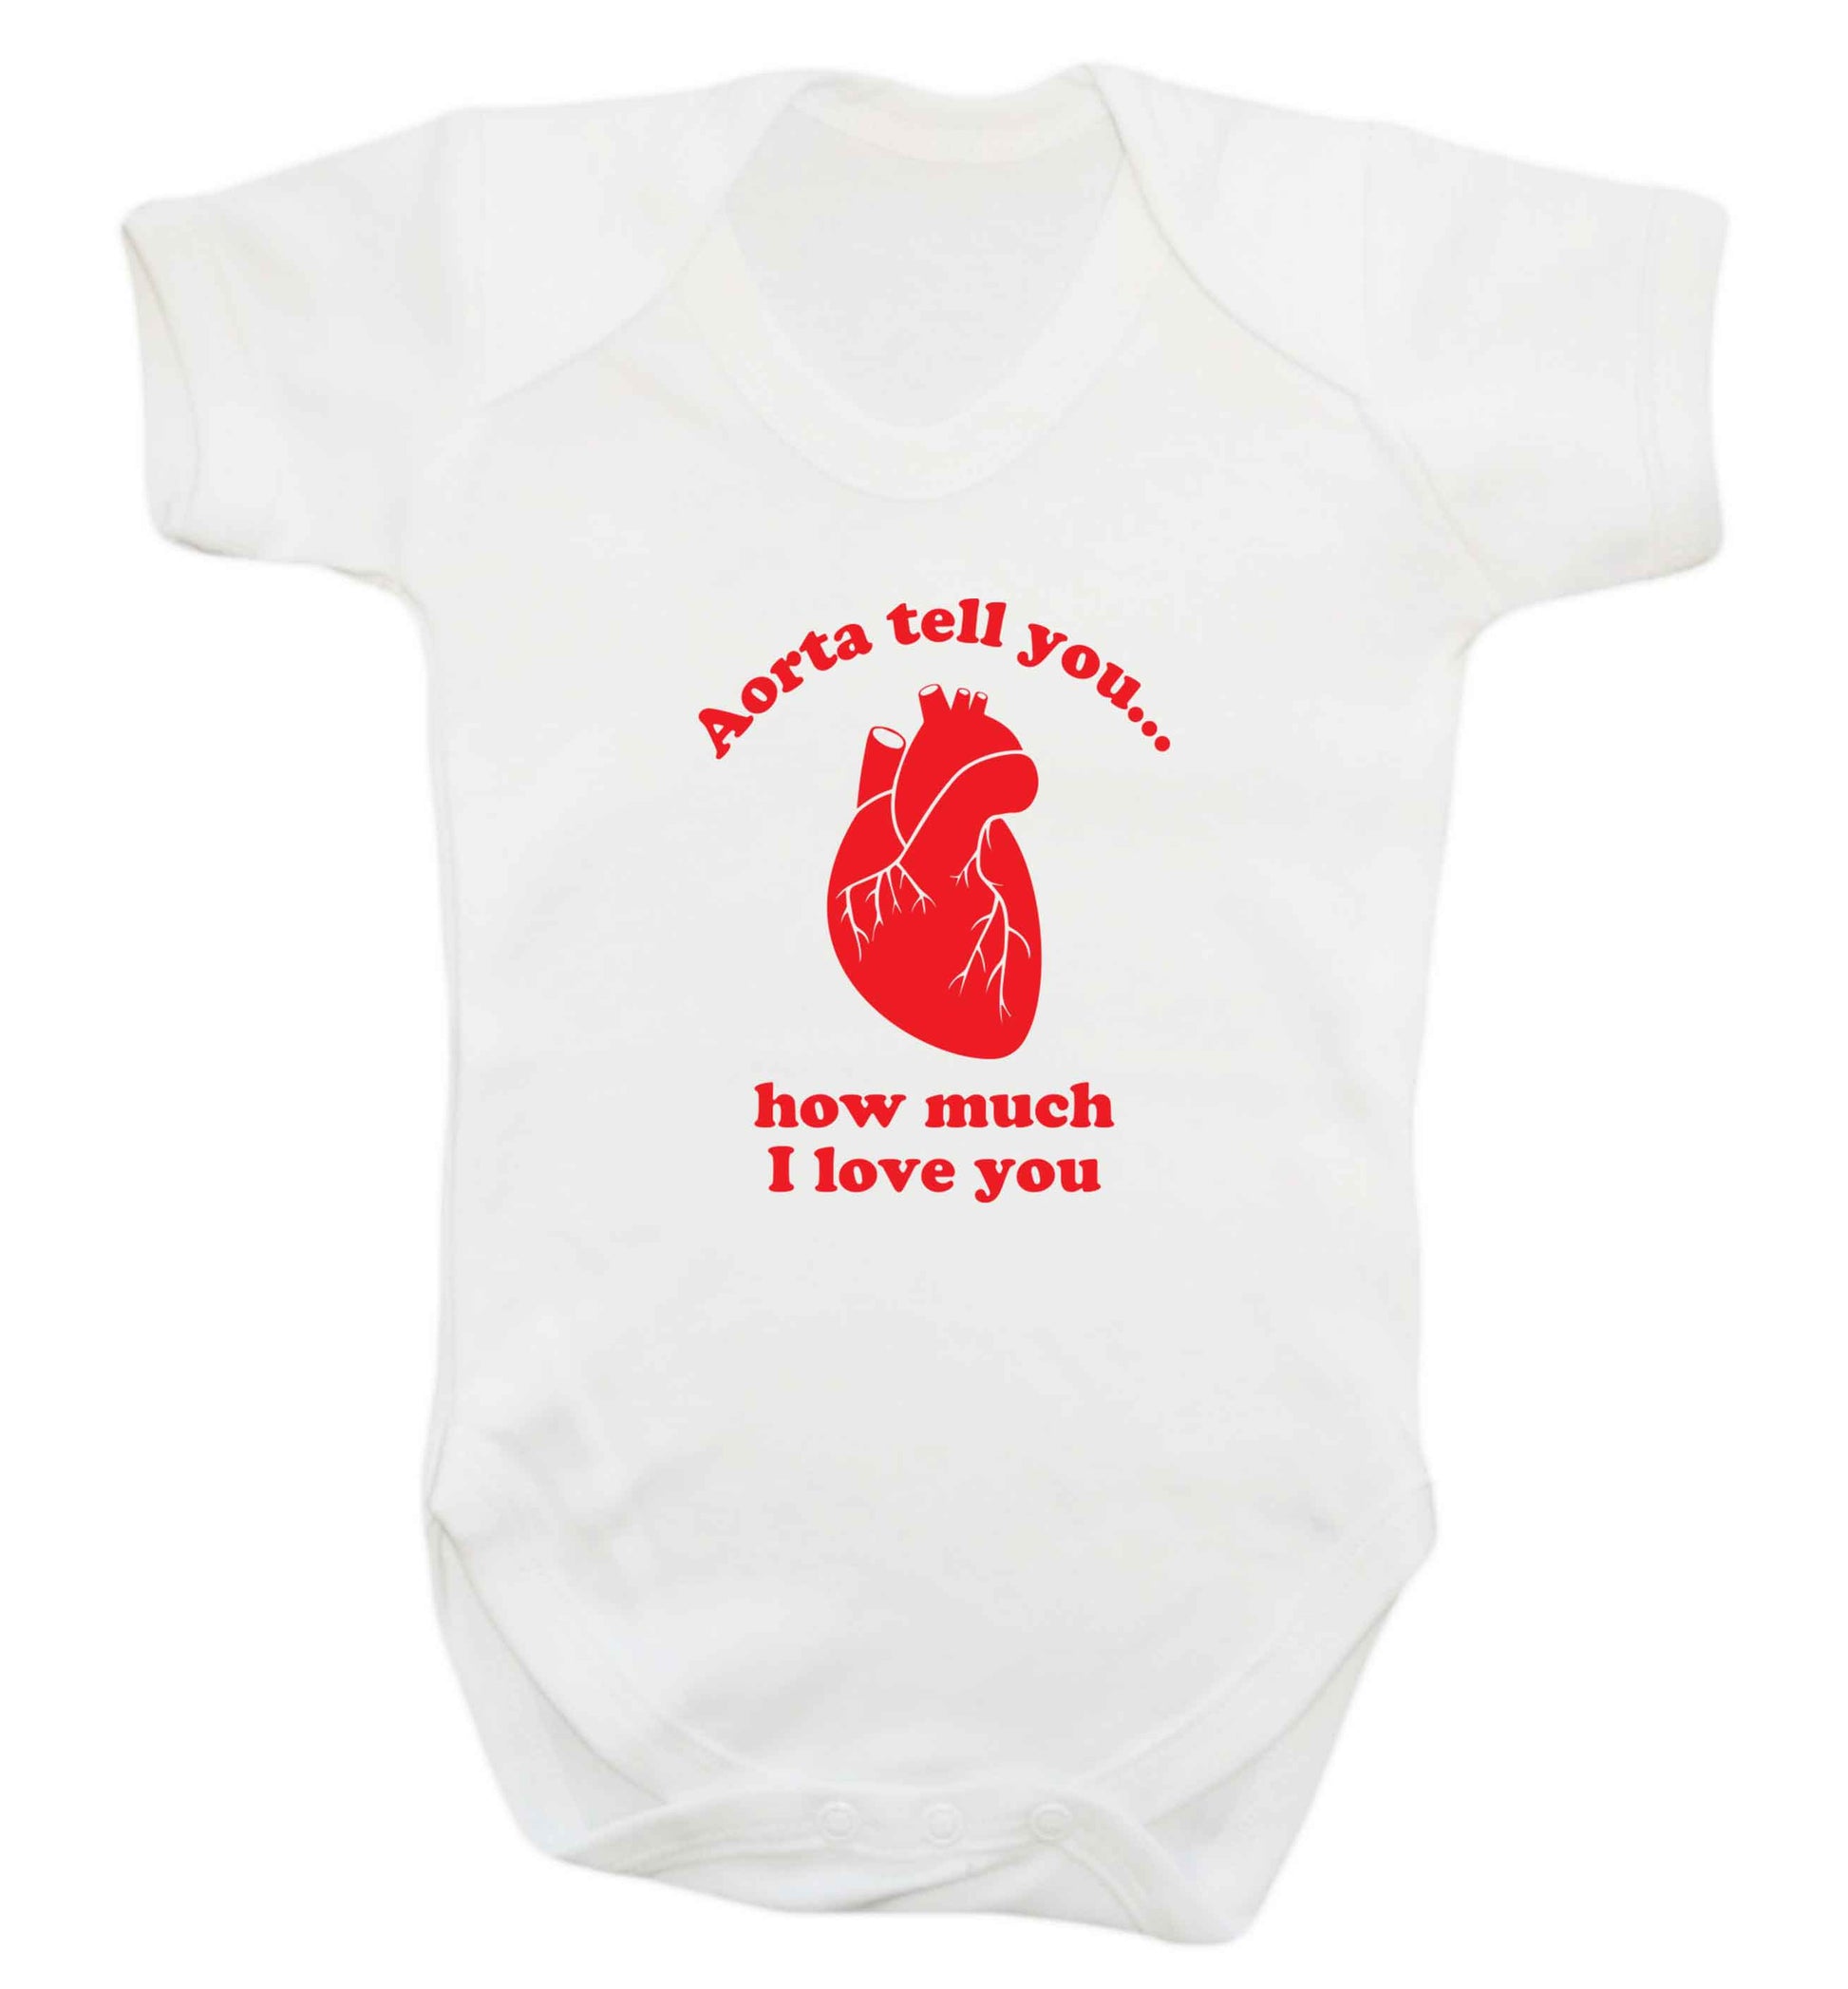 Aorta tell you how much I love you baby vest white 18-24 months